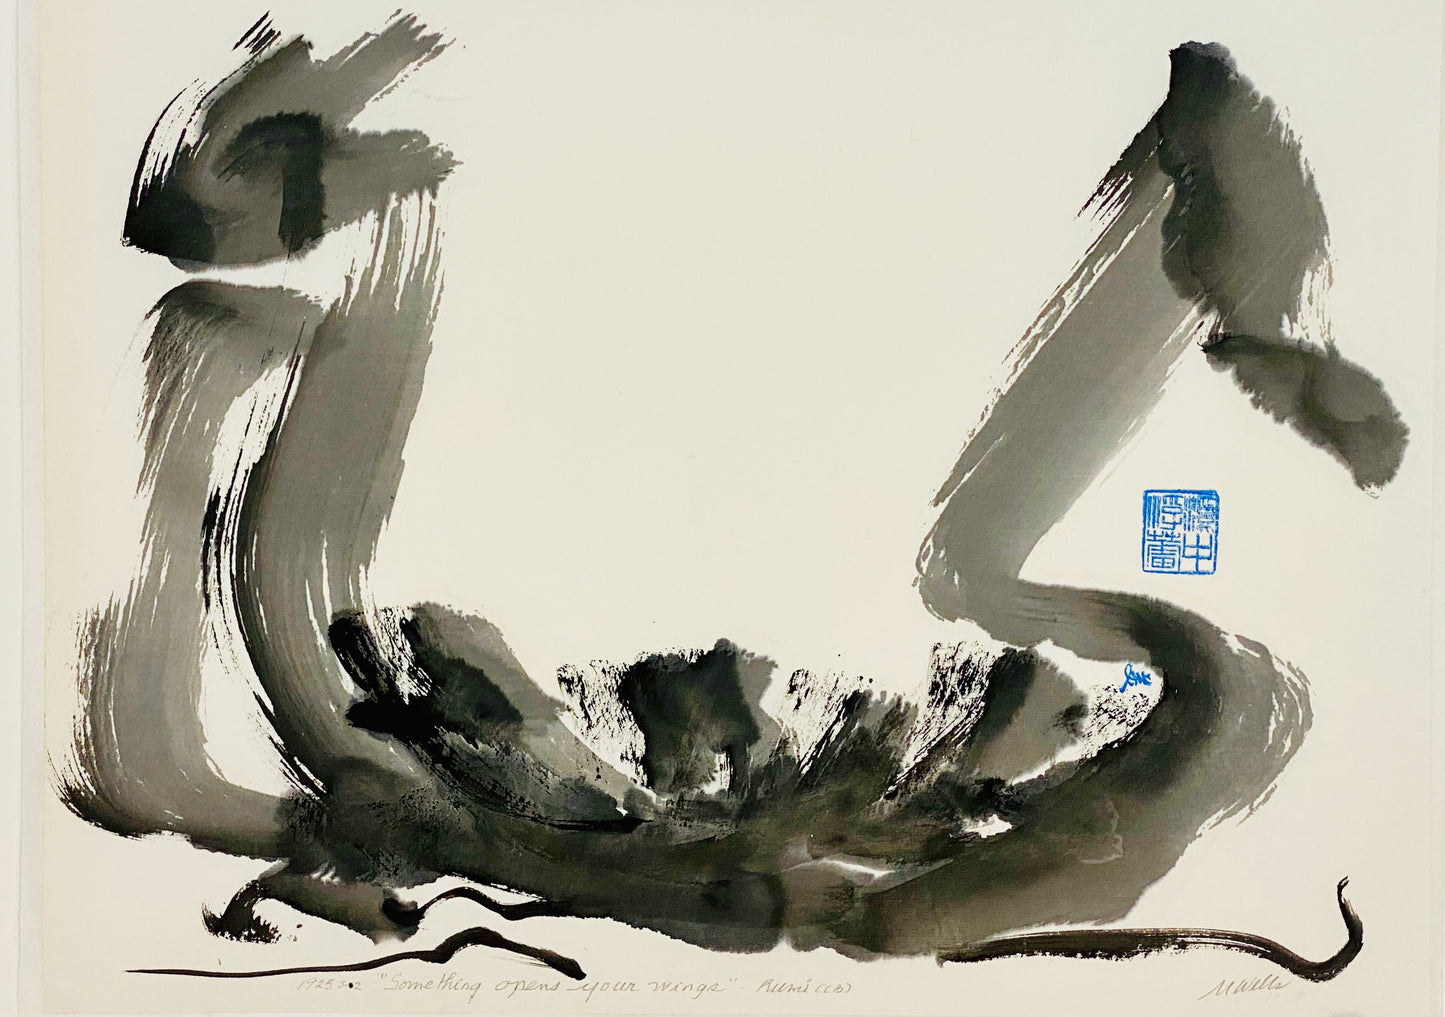 Zen Abstract Ink Painting “Something Opens Our Wings” by Marilyn Wells Original